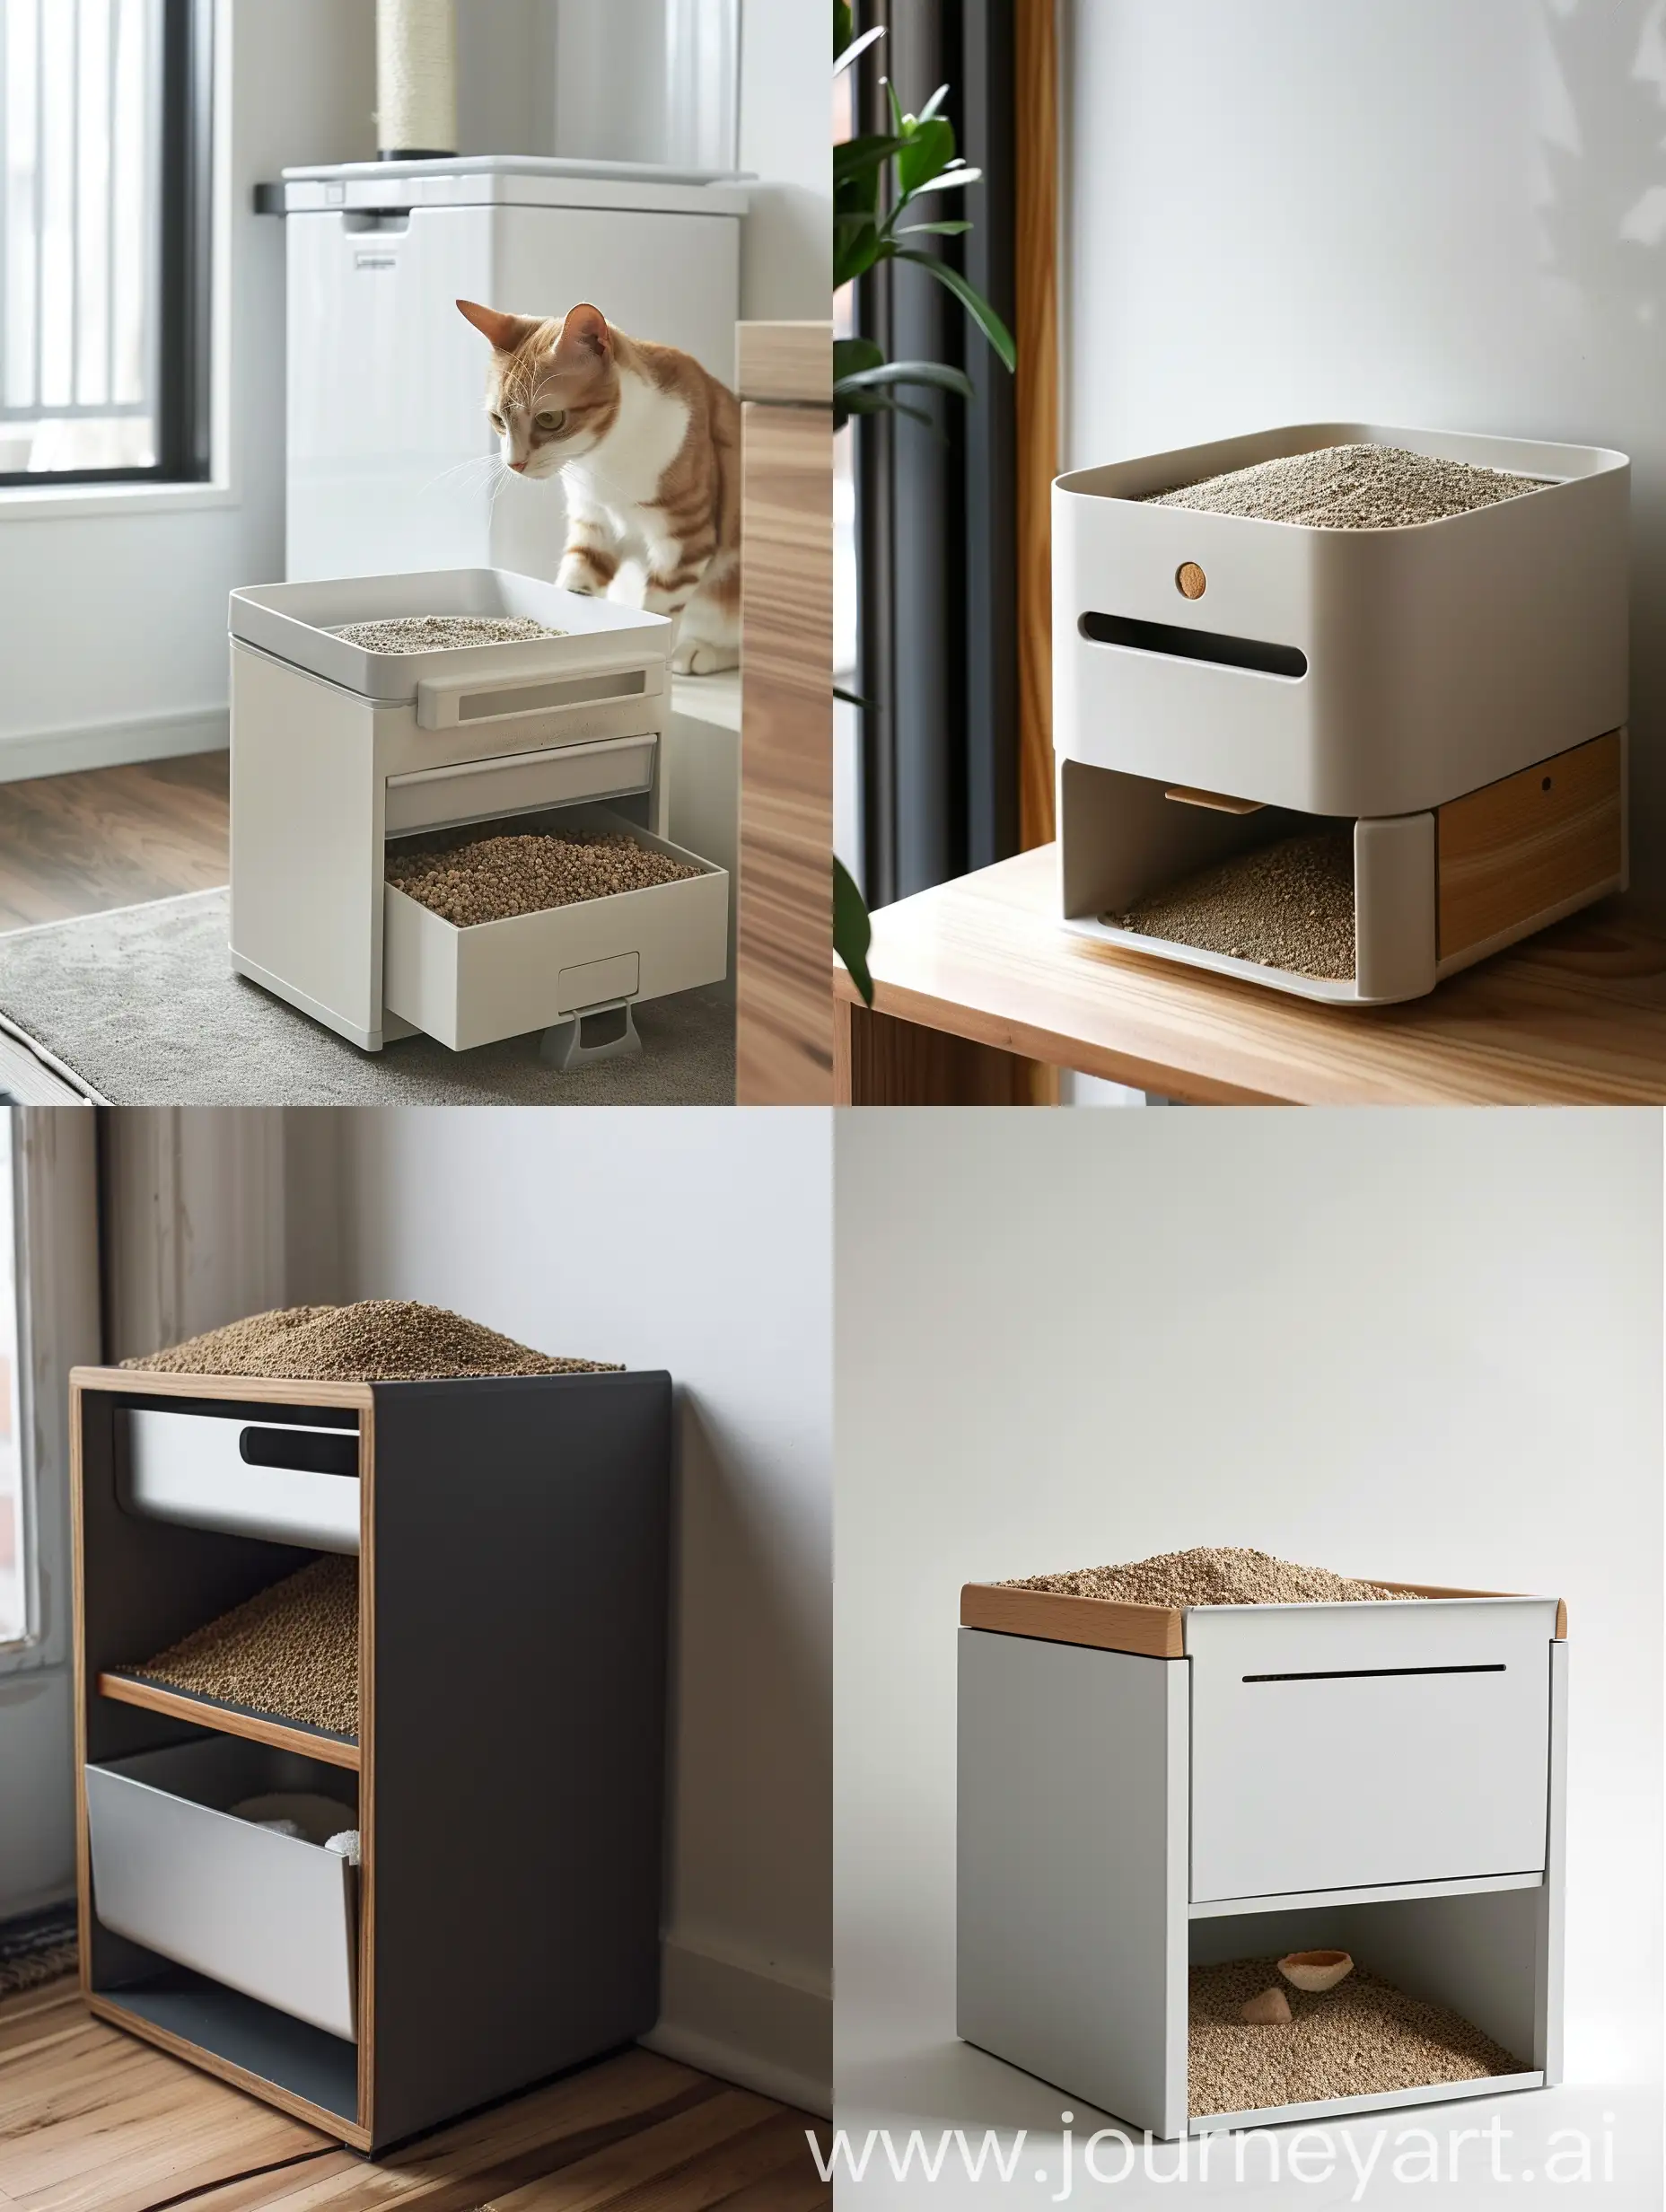 create sample cat litter design that has cat poop collection drawer on the bottom which tightly closed and clean litter on top